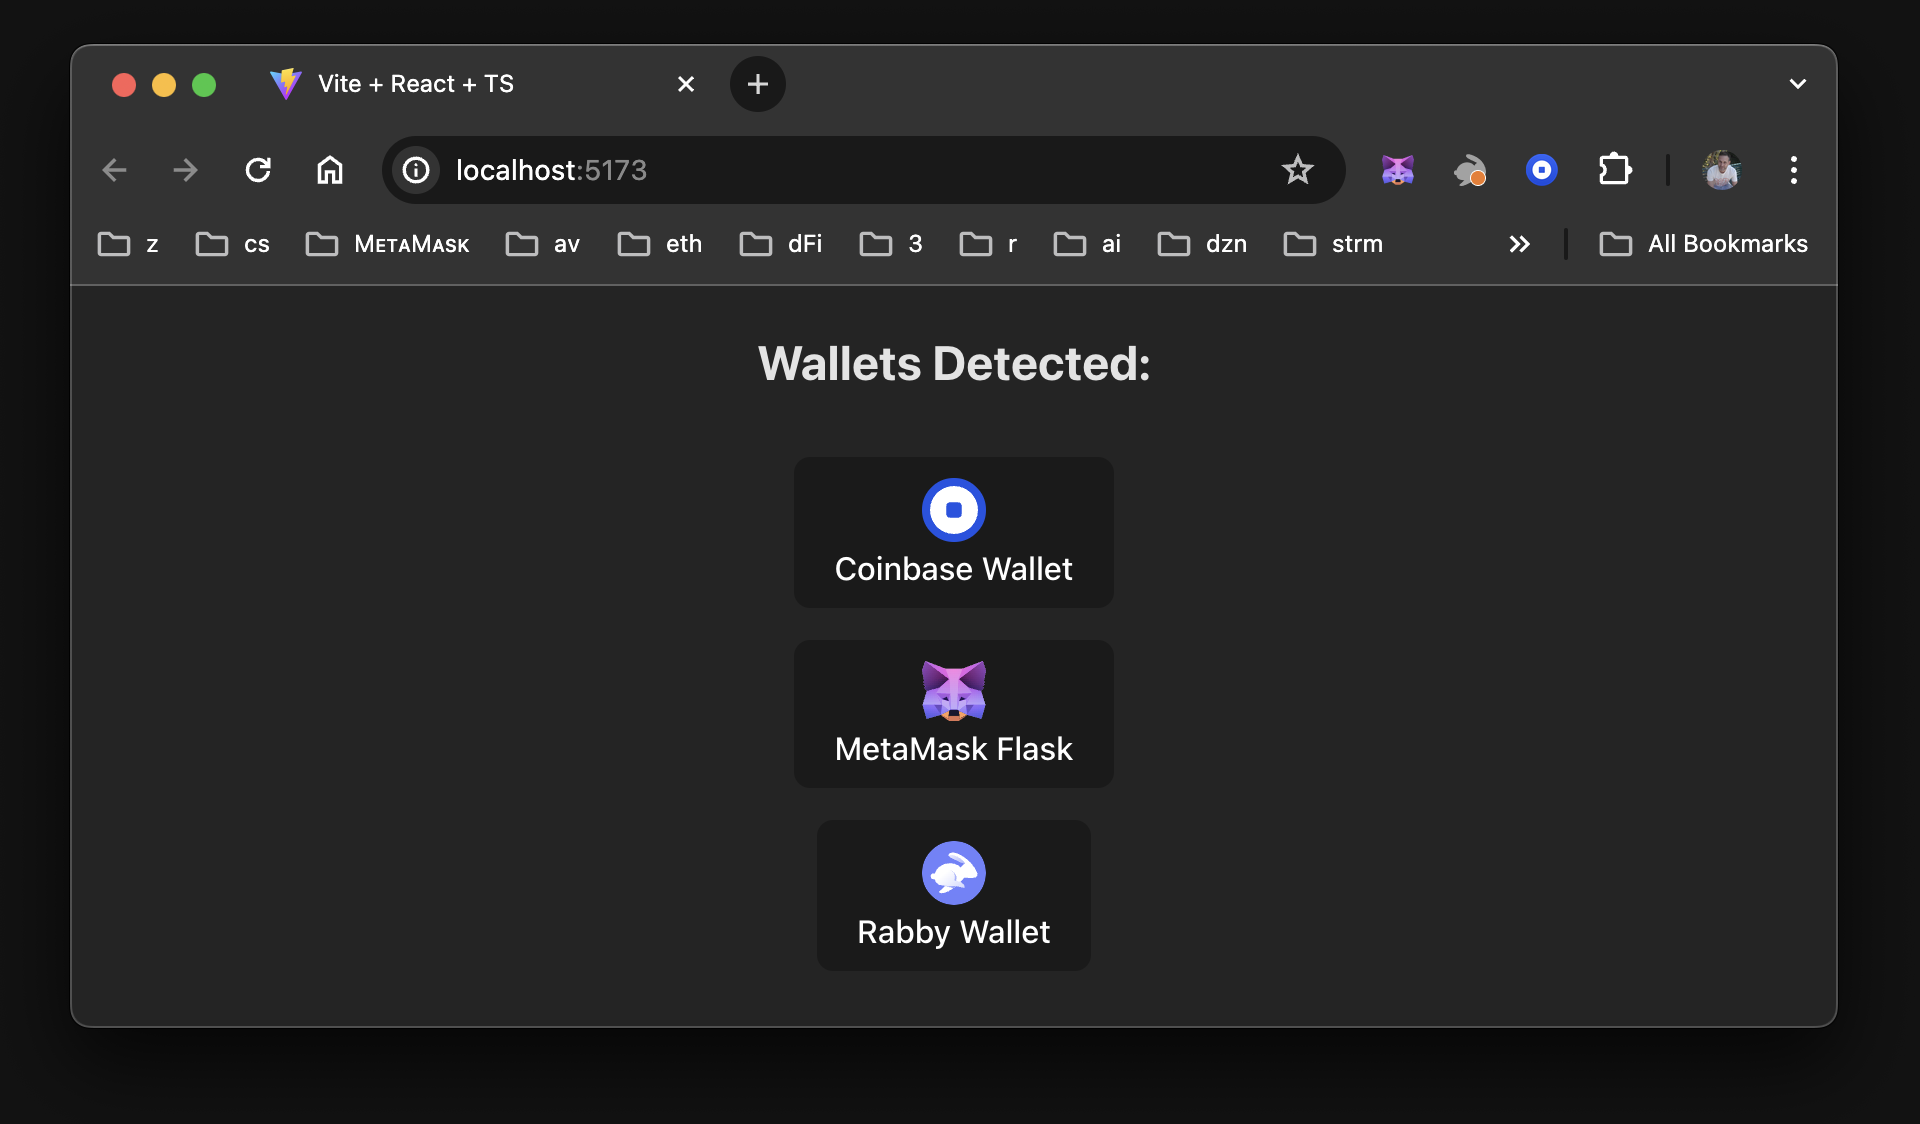 View of Dapp - Wallets Detected